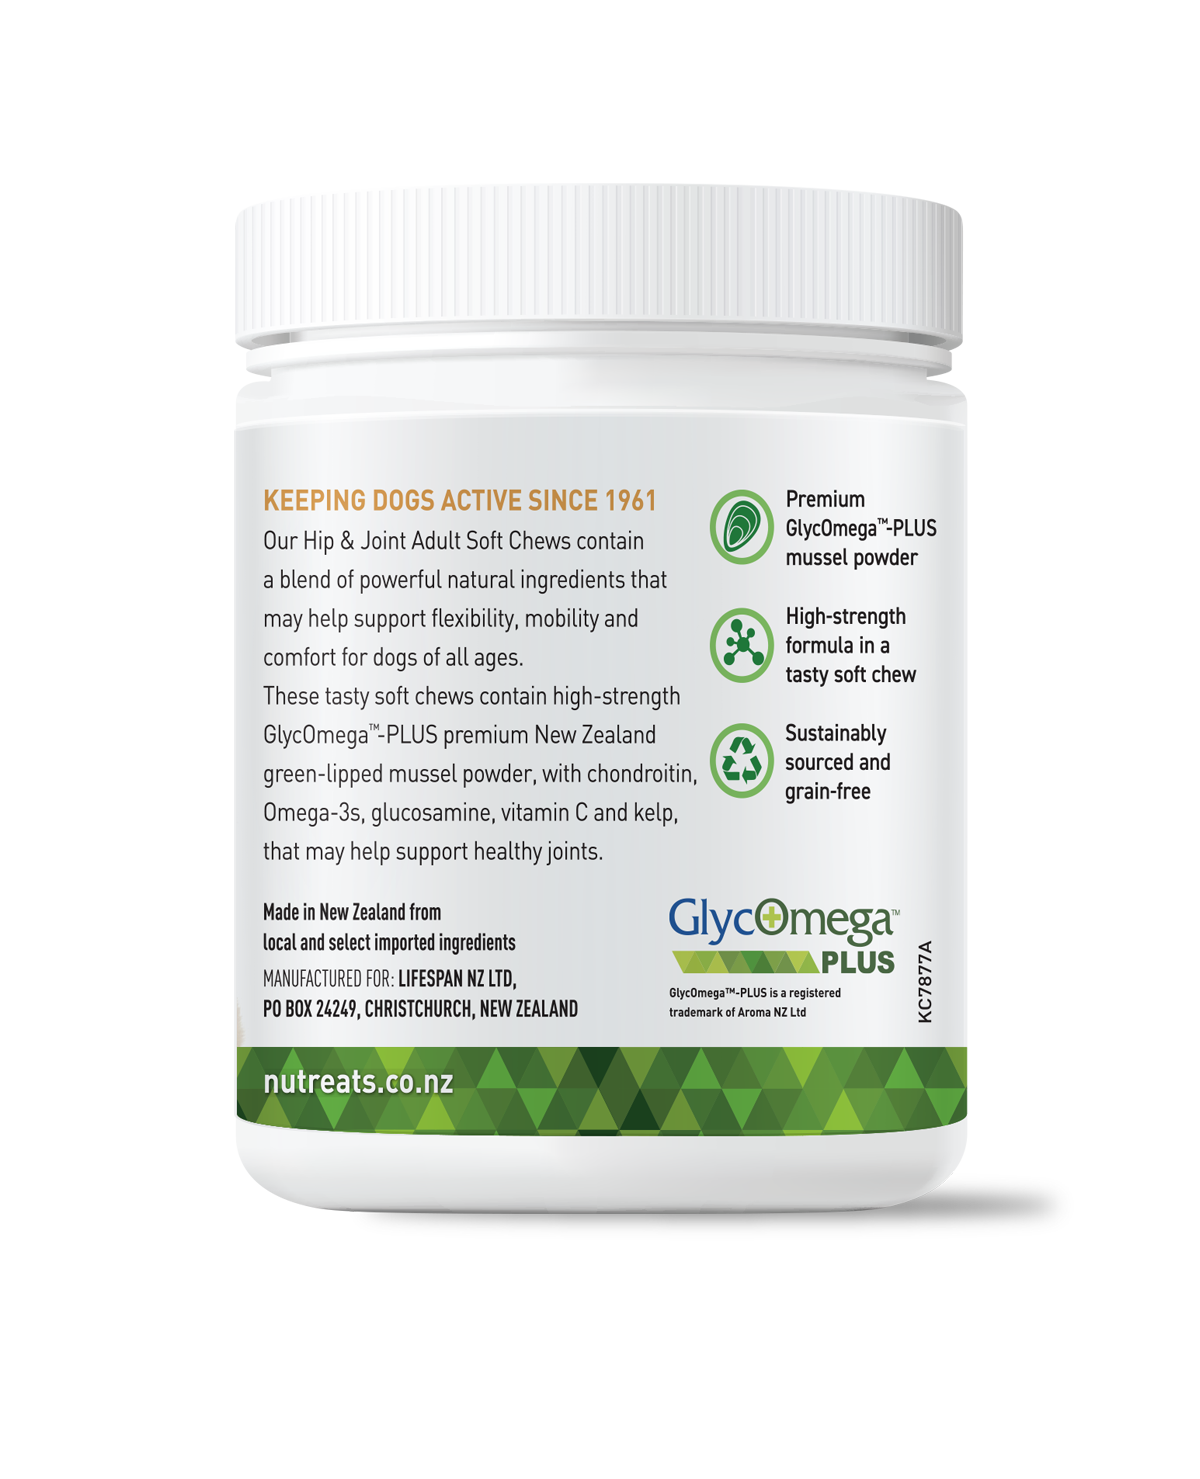 Joint health supplement for dogs support joint mobility with natural omega 3, Glucosamine Nutreats NZ. Advanced joint support formula with active green -lipped mussel, rich in omega3, chondroitin and glucosamine for dogs. With GlycOmega PLUS green lipped mussel powder. May help support healthy bones and joints in your dog.